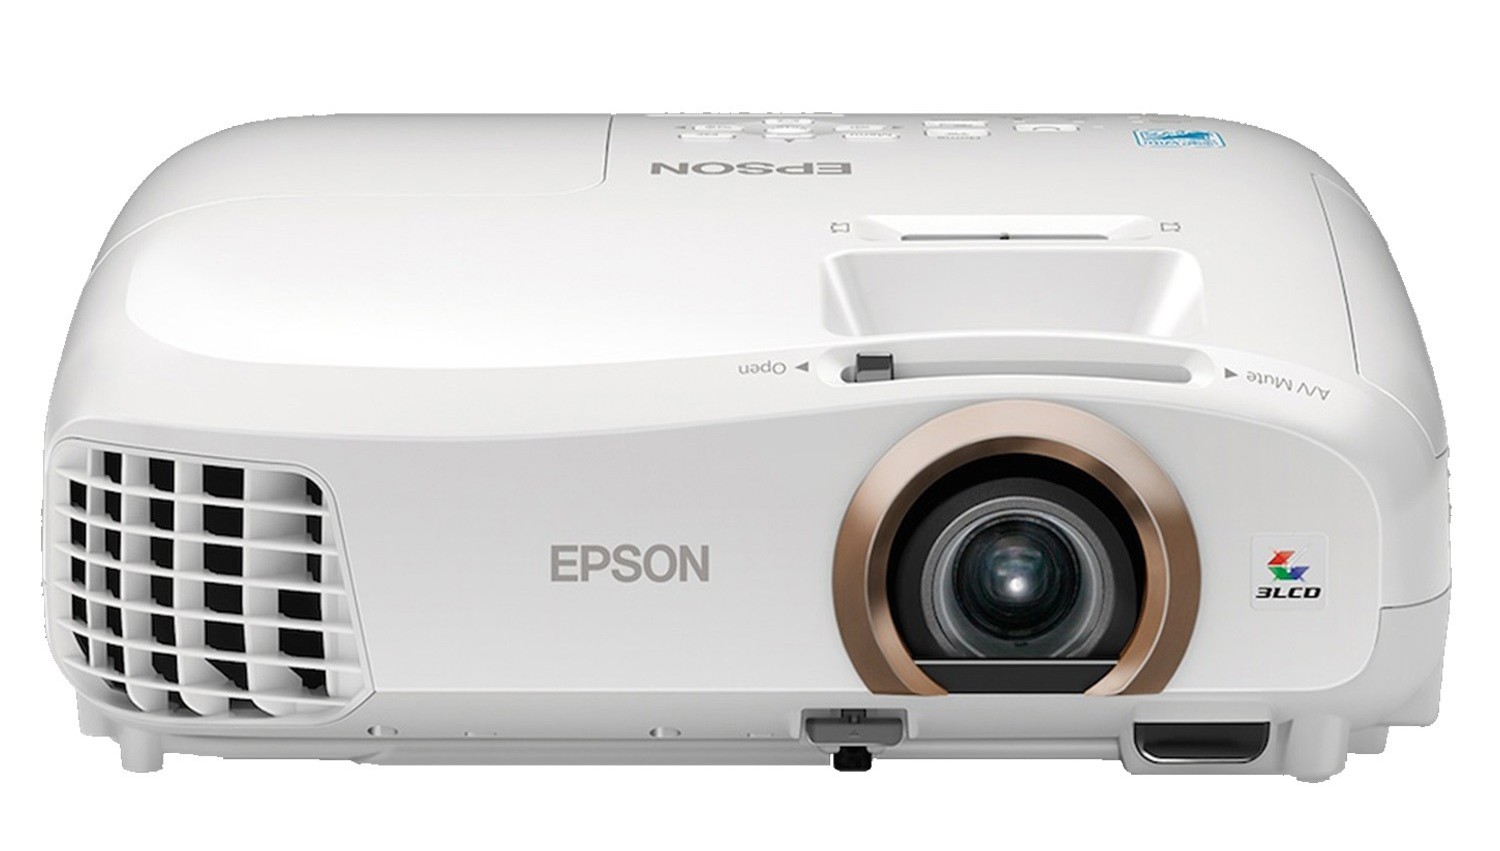 EPSON’s EH TW 5350 offers exceptional value